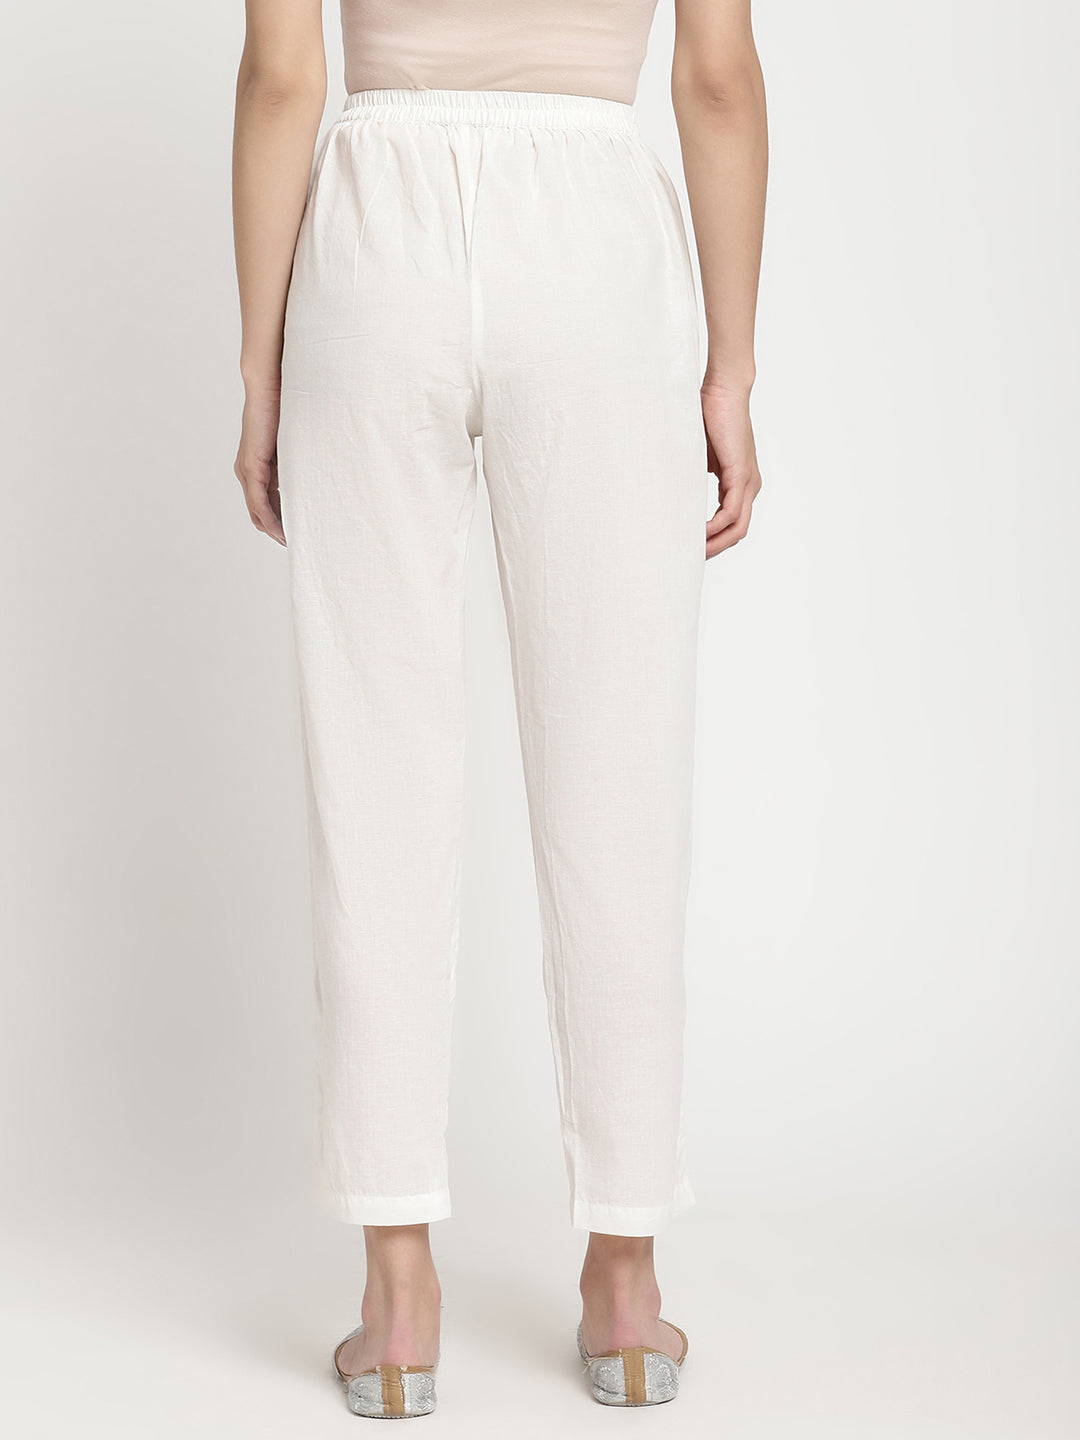 Attention, pant lovers! This White Cotton Straight Pant is your dream come true. Semi-elasticated, simple and comfortable. Shop | COD + free shipping available.